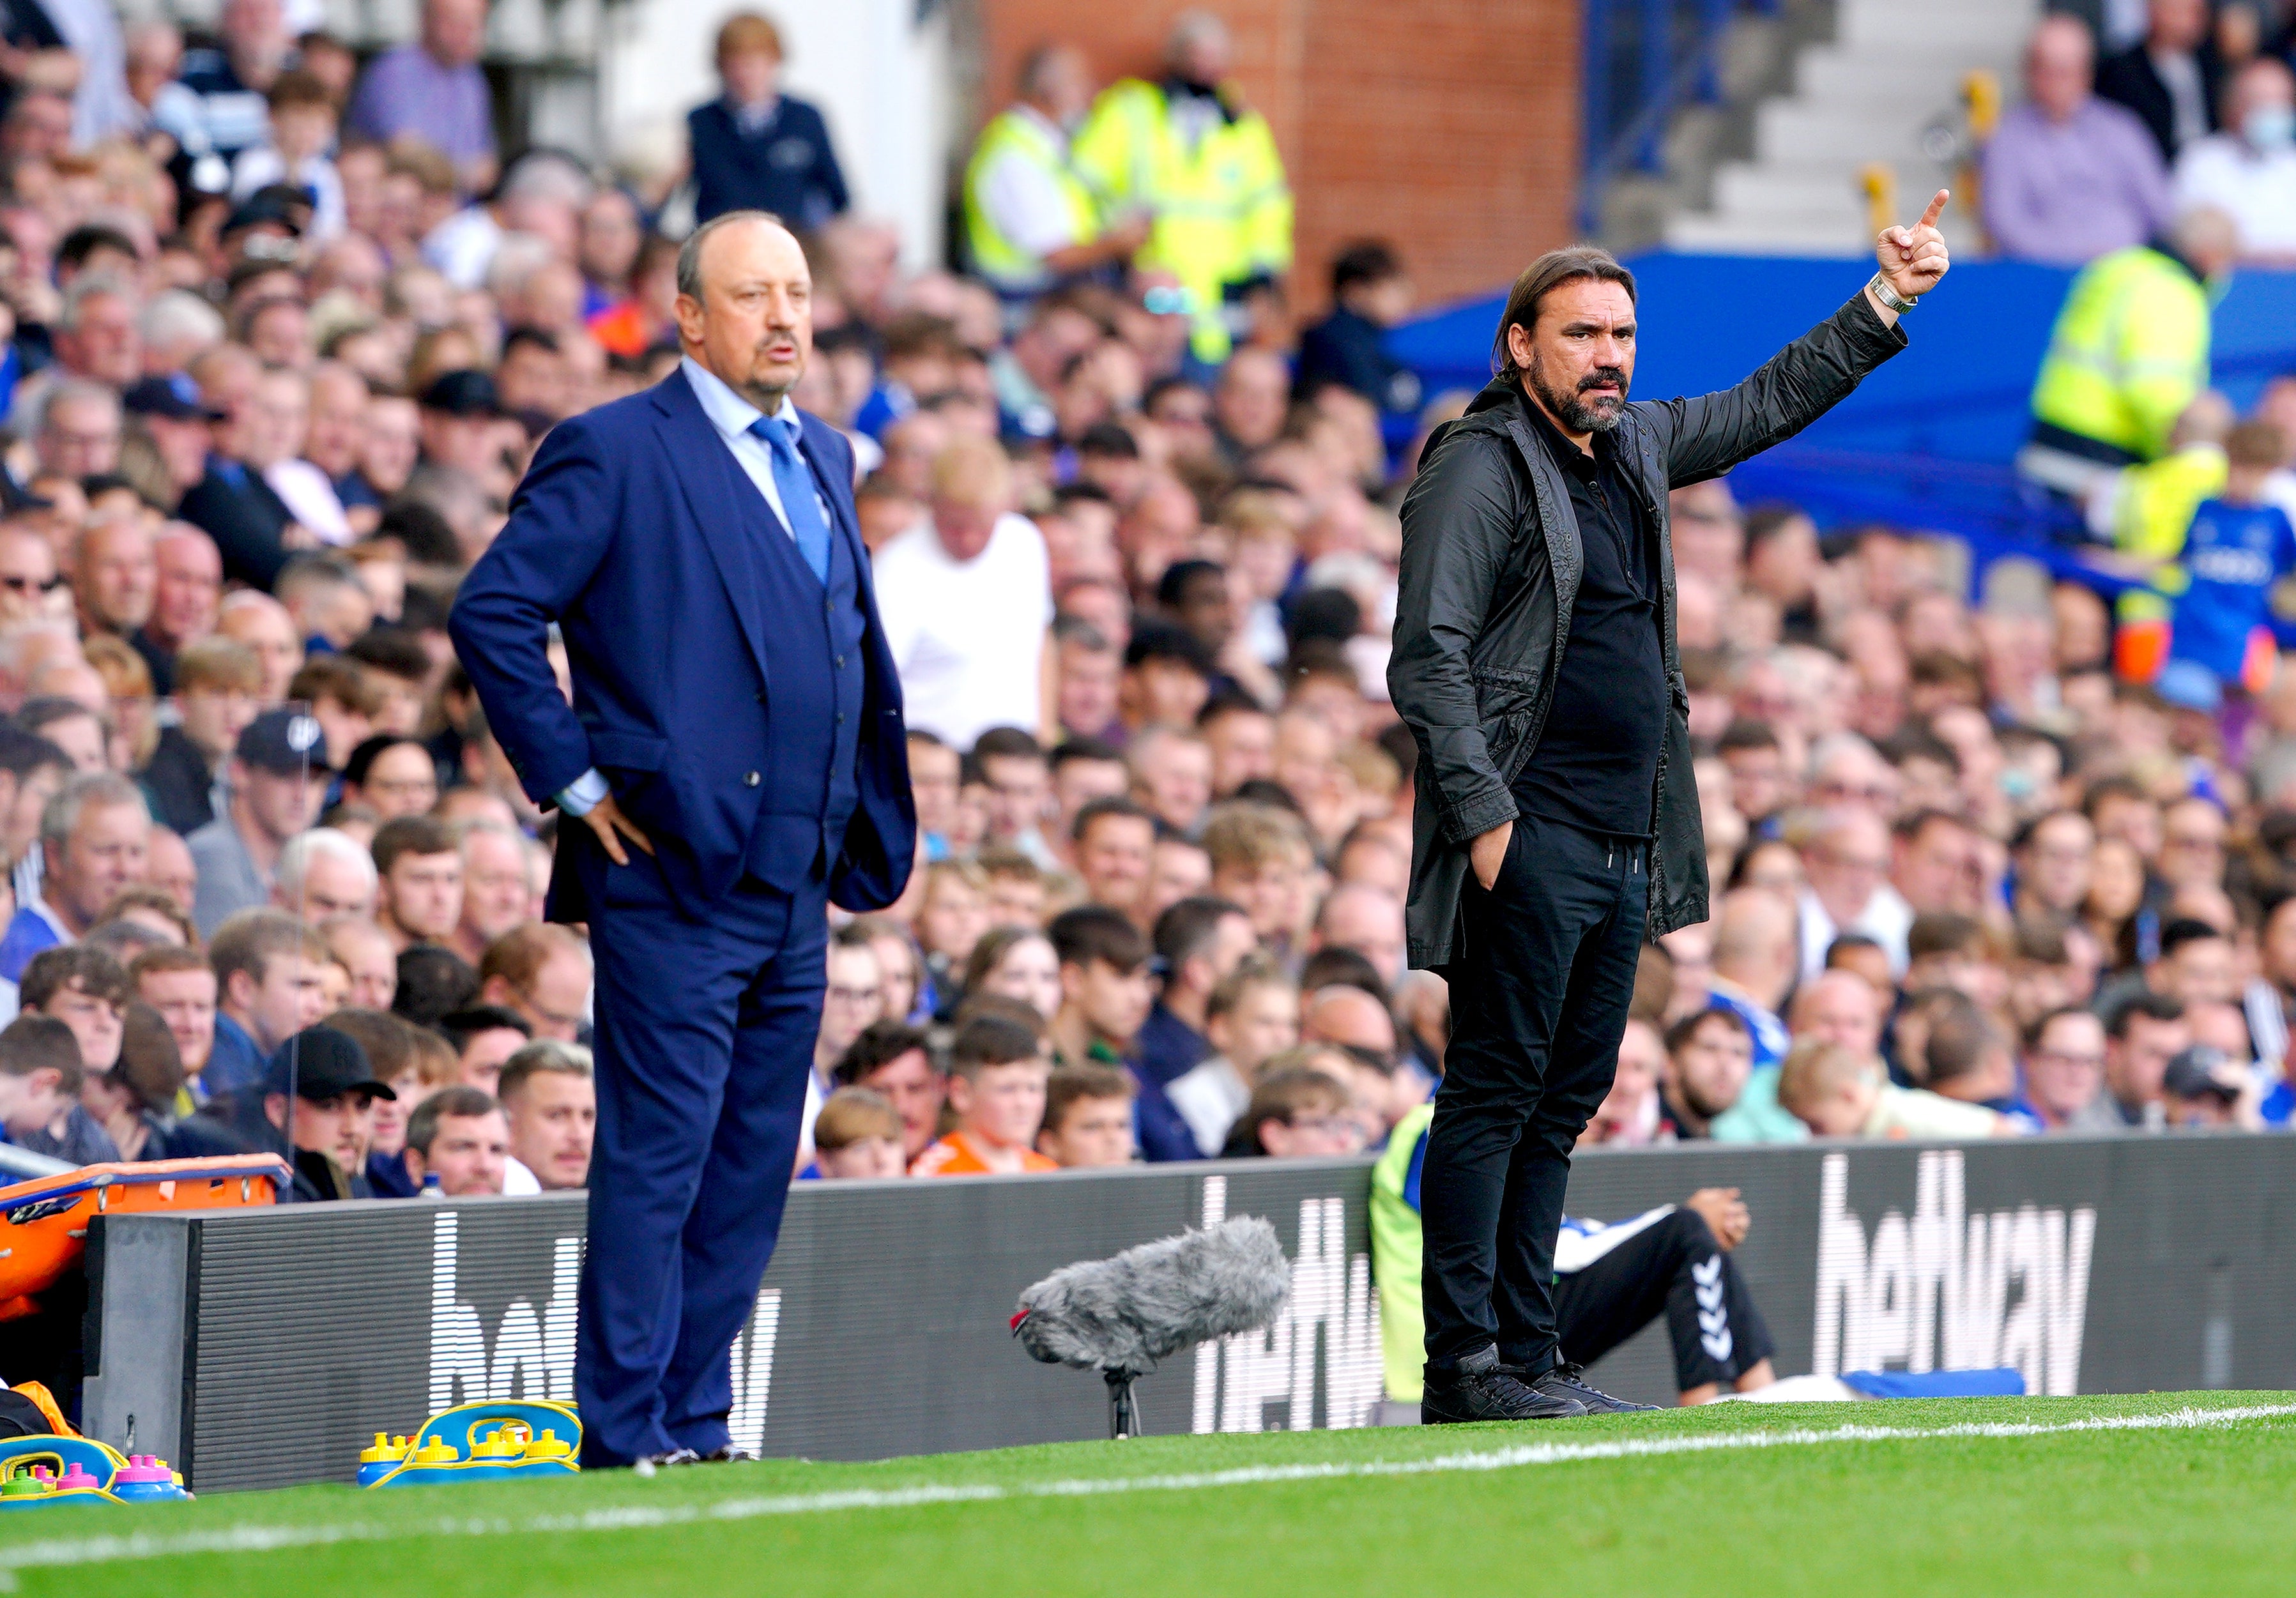 Norwich manager Daniel Farke, right, felt Everton’s penalty should not have been given (Peter Byrne/PA)